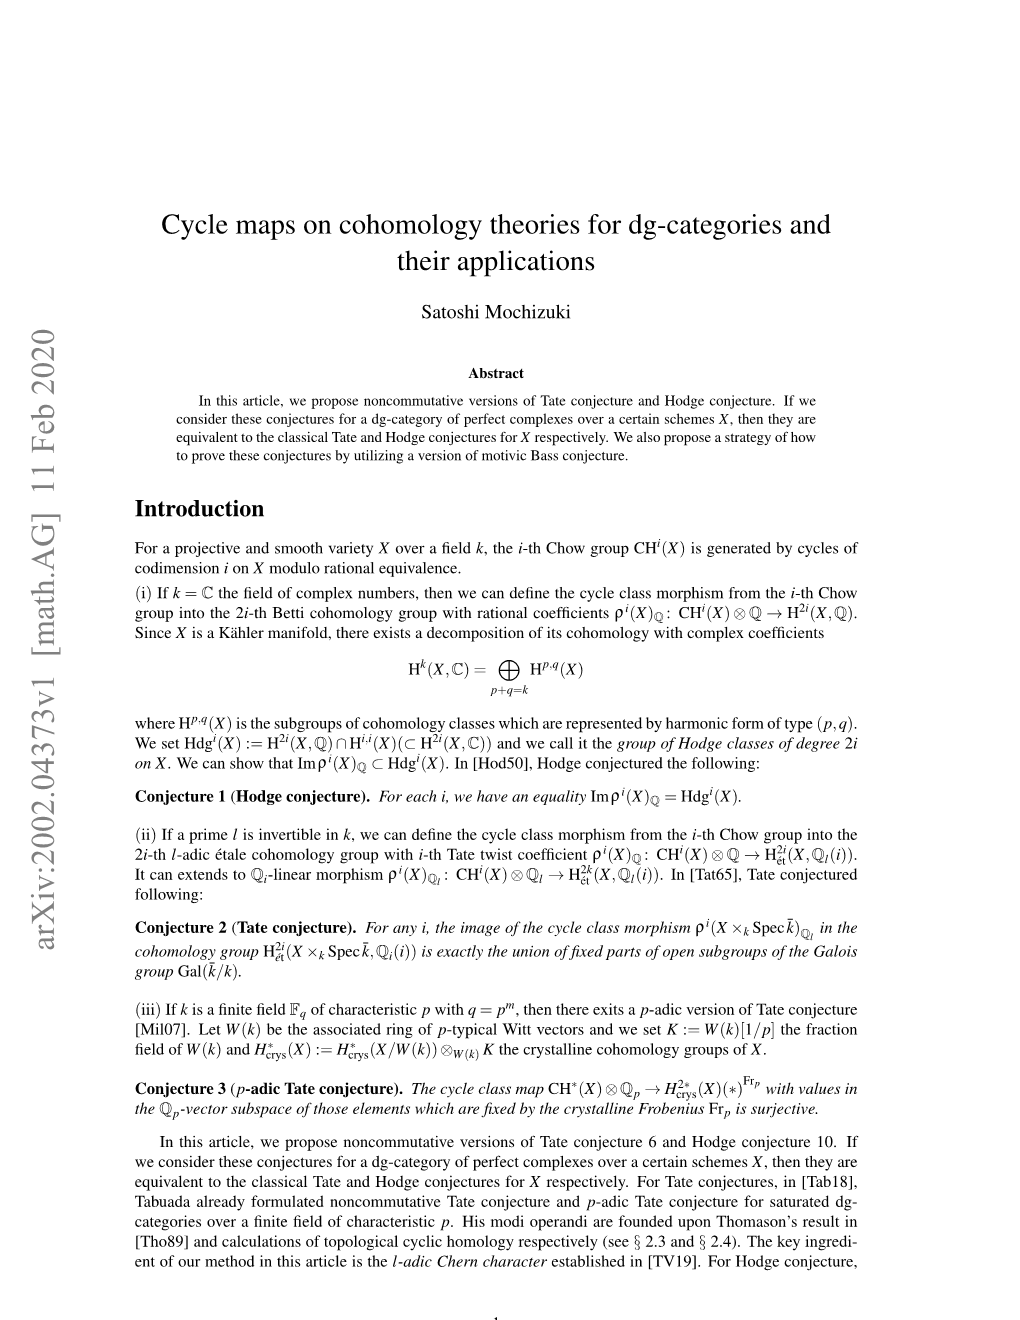 Cycle Maps on Cohomology Theories for Dg-Categories and Their Applications